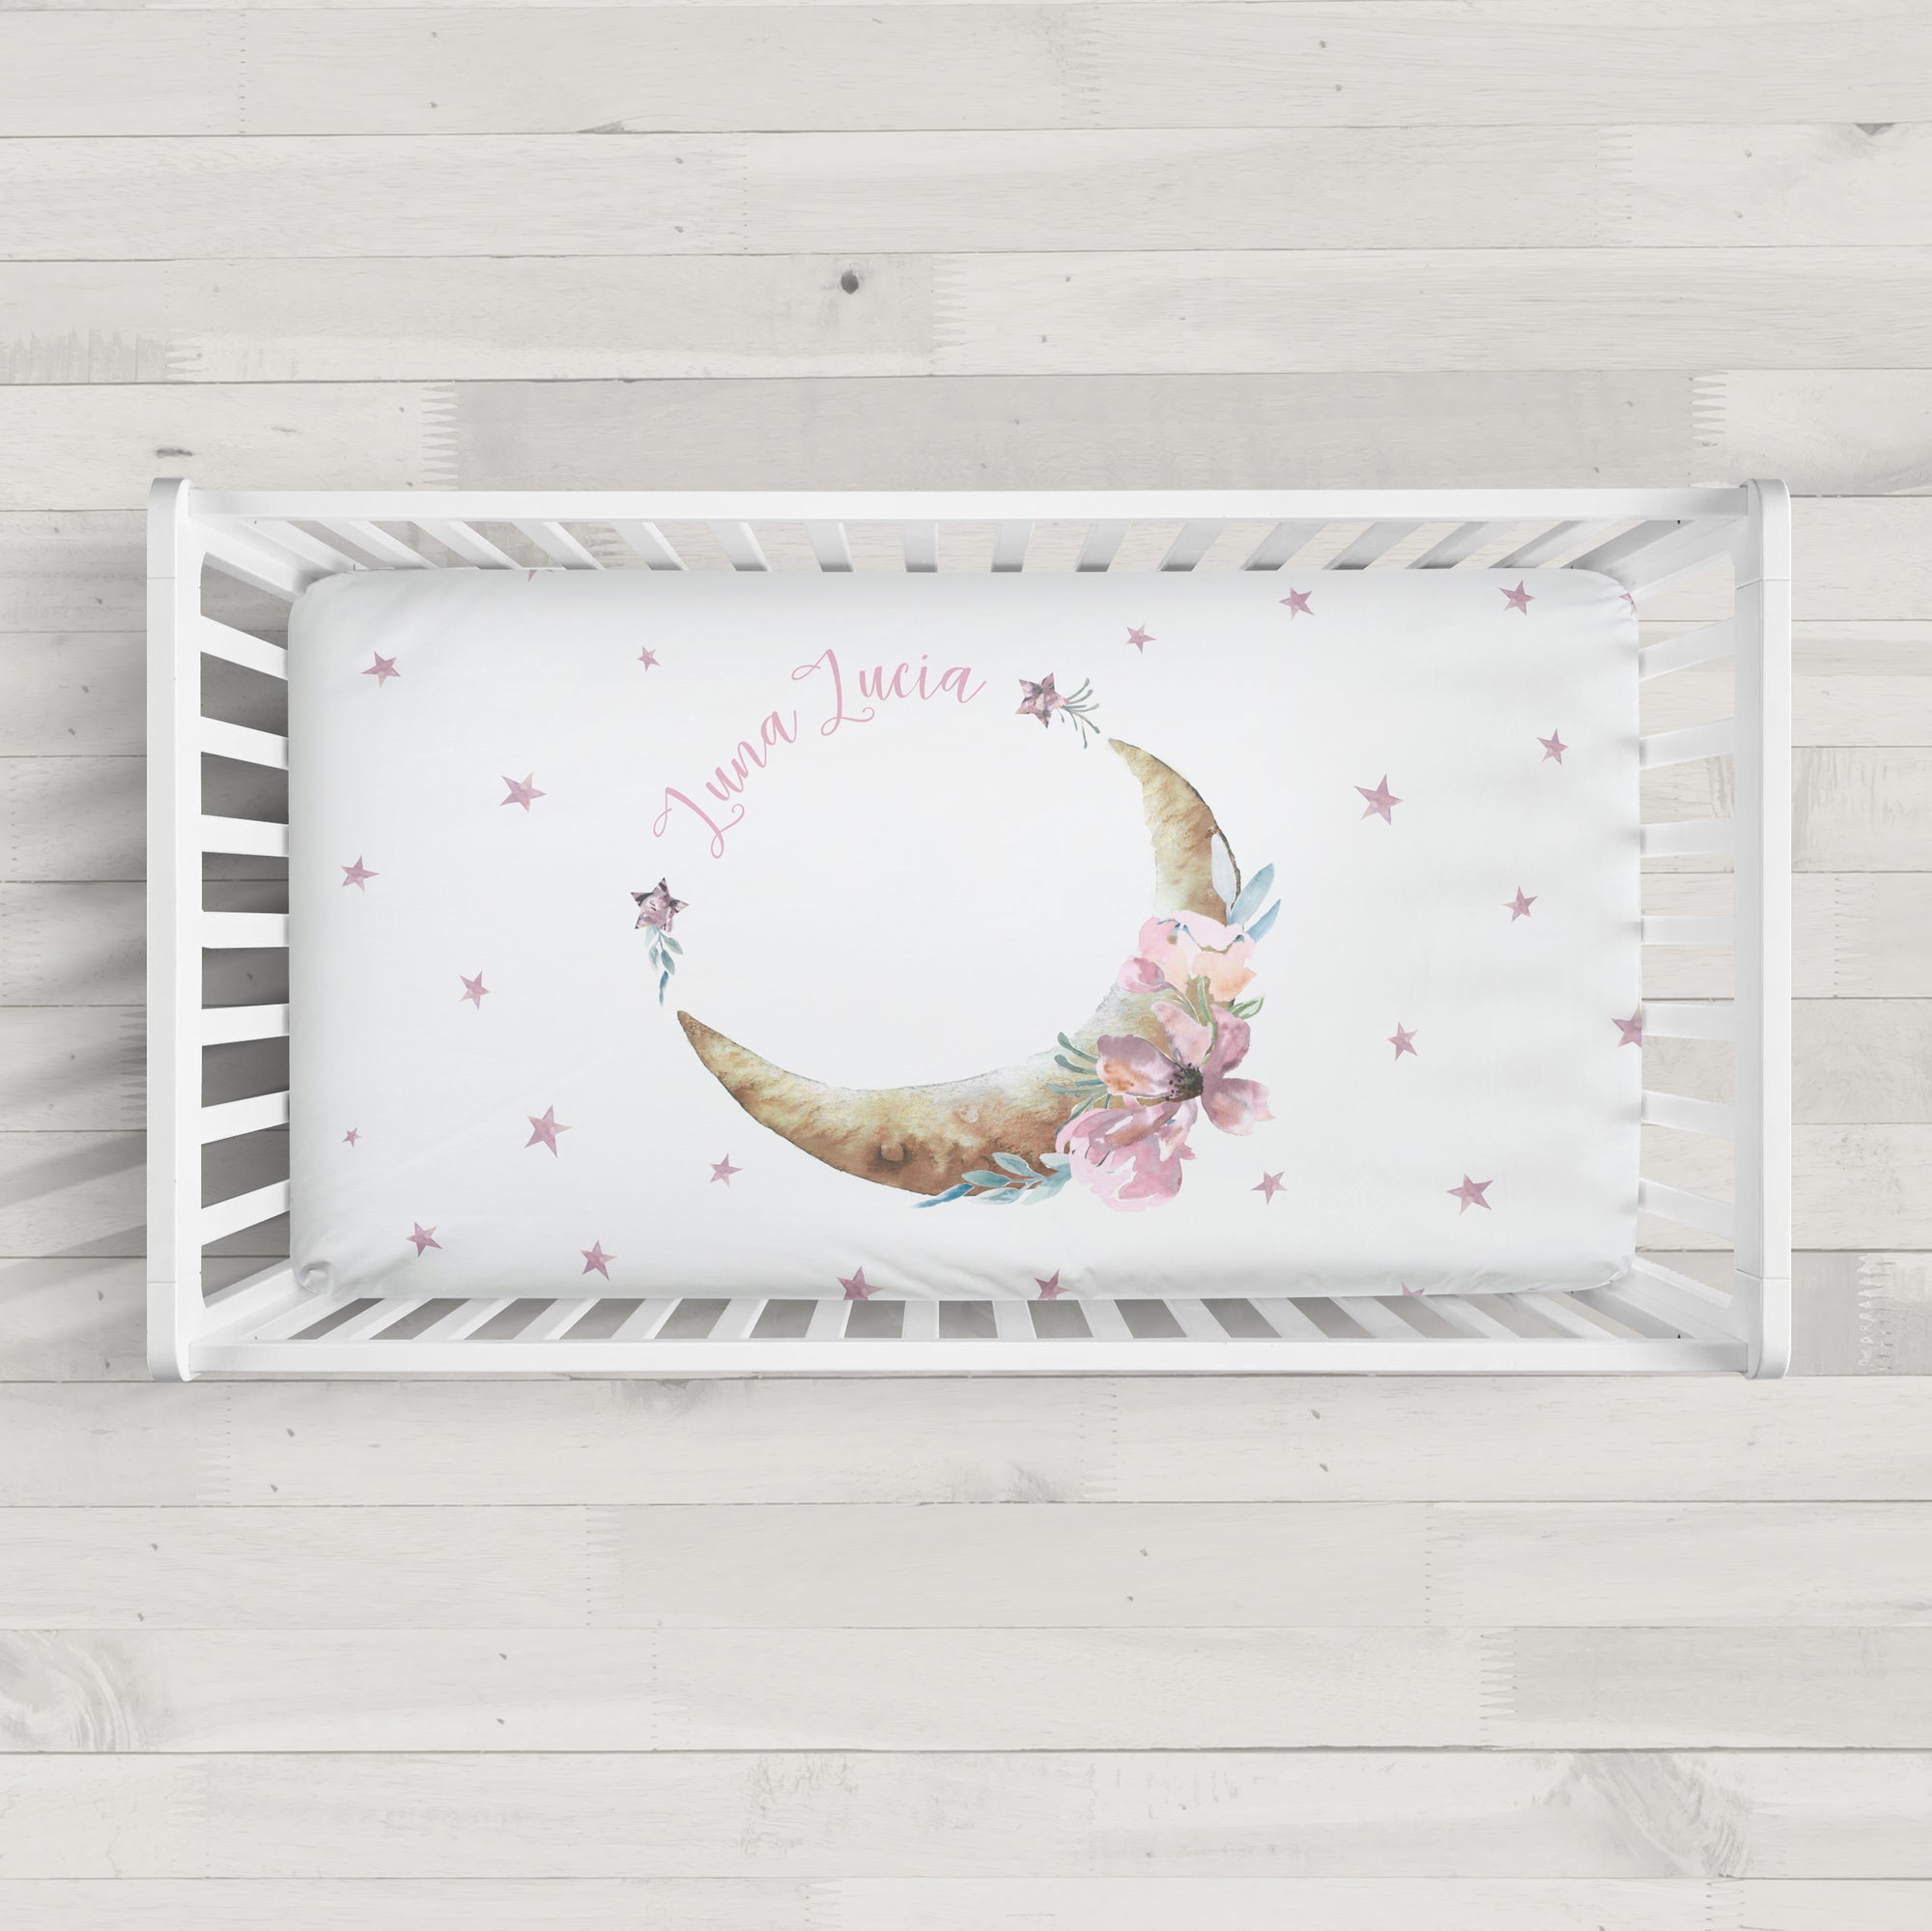 Golden moon with blush flowers and stars | Personalized Crib sheet | Celestial | Moon and stars | Pipsy.com